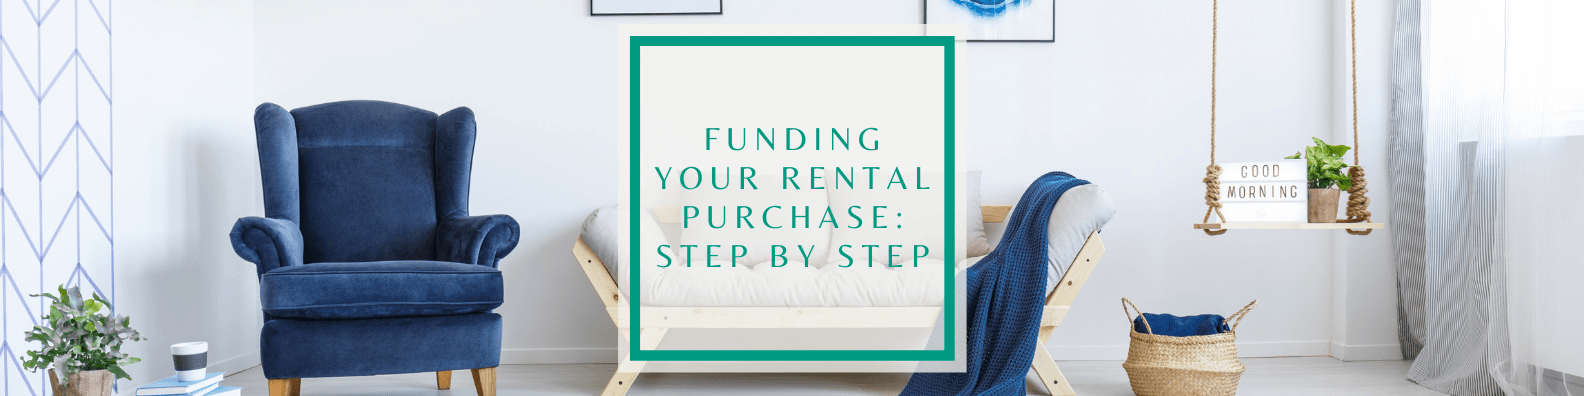 Funding your Rental Purchase